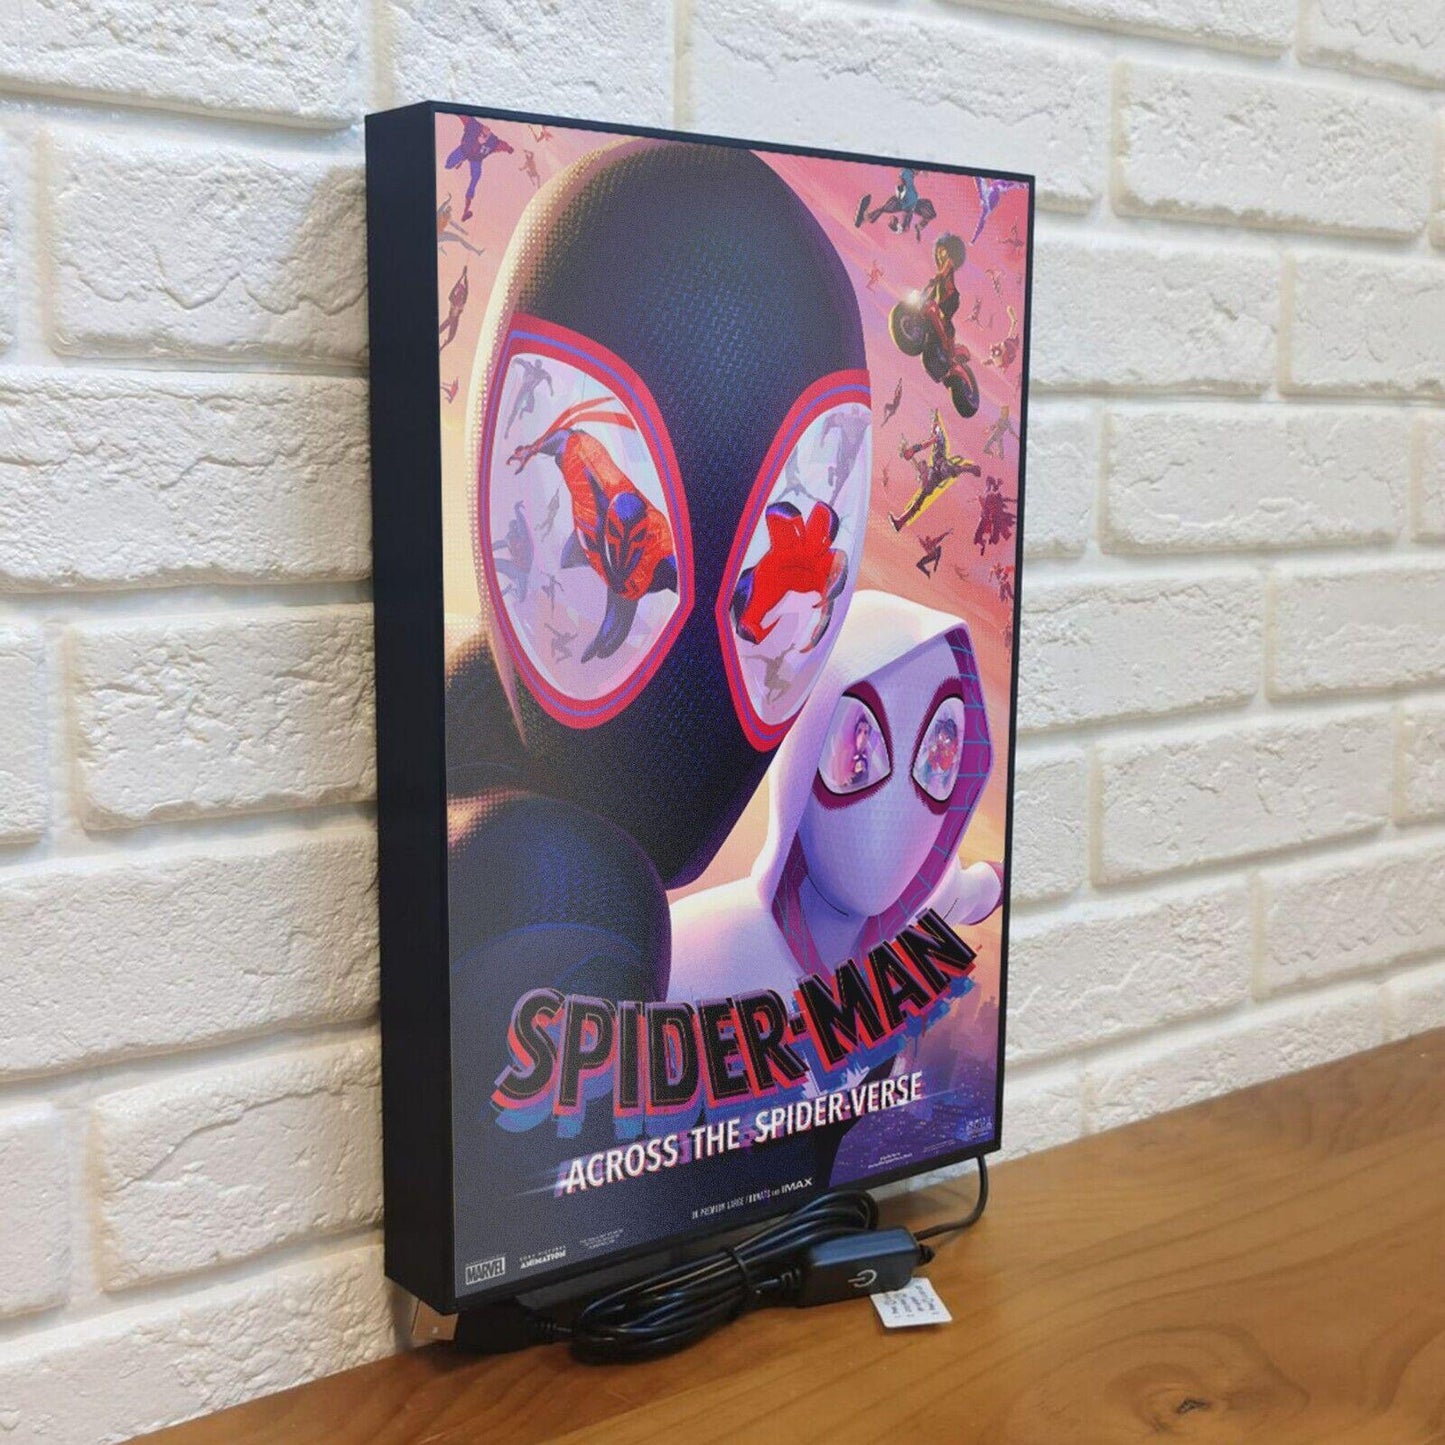 Spider-Man: Into the Spider-Verse Movie Poster LED Light Box USB Powered - FYLZGO Signs